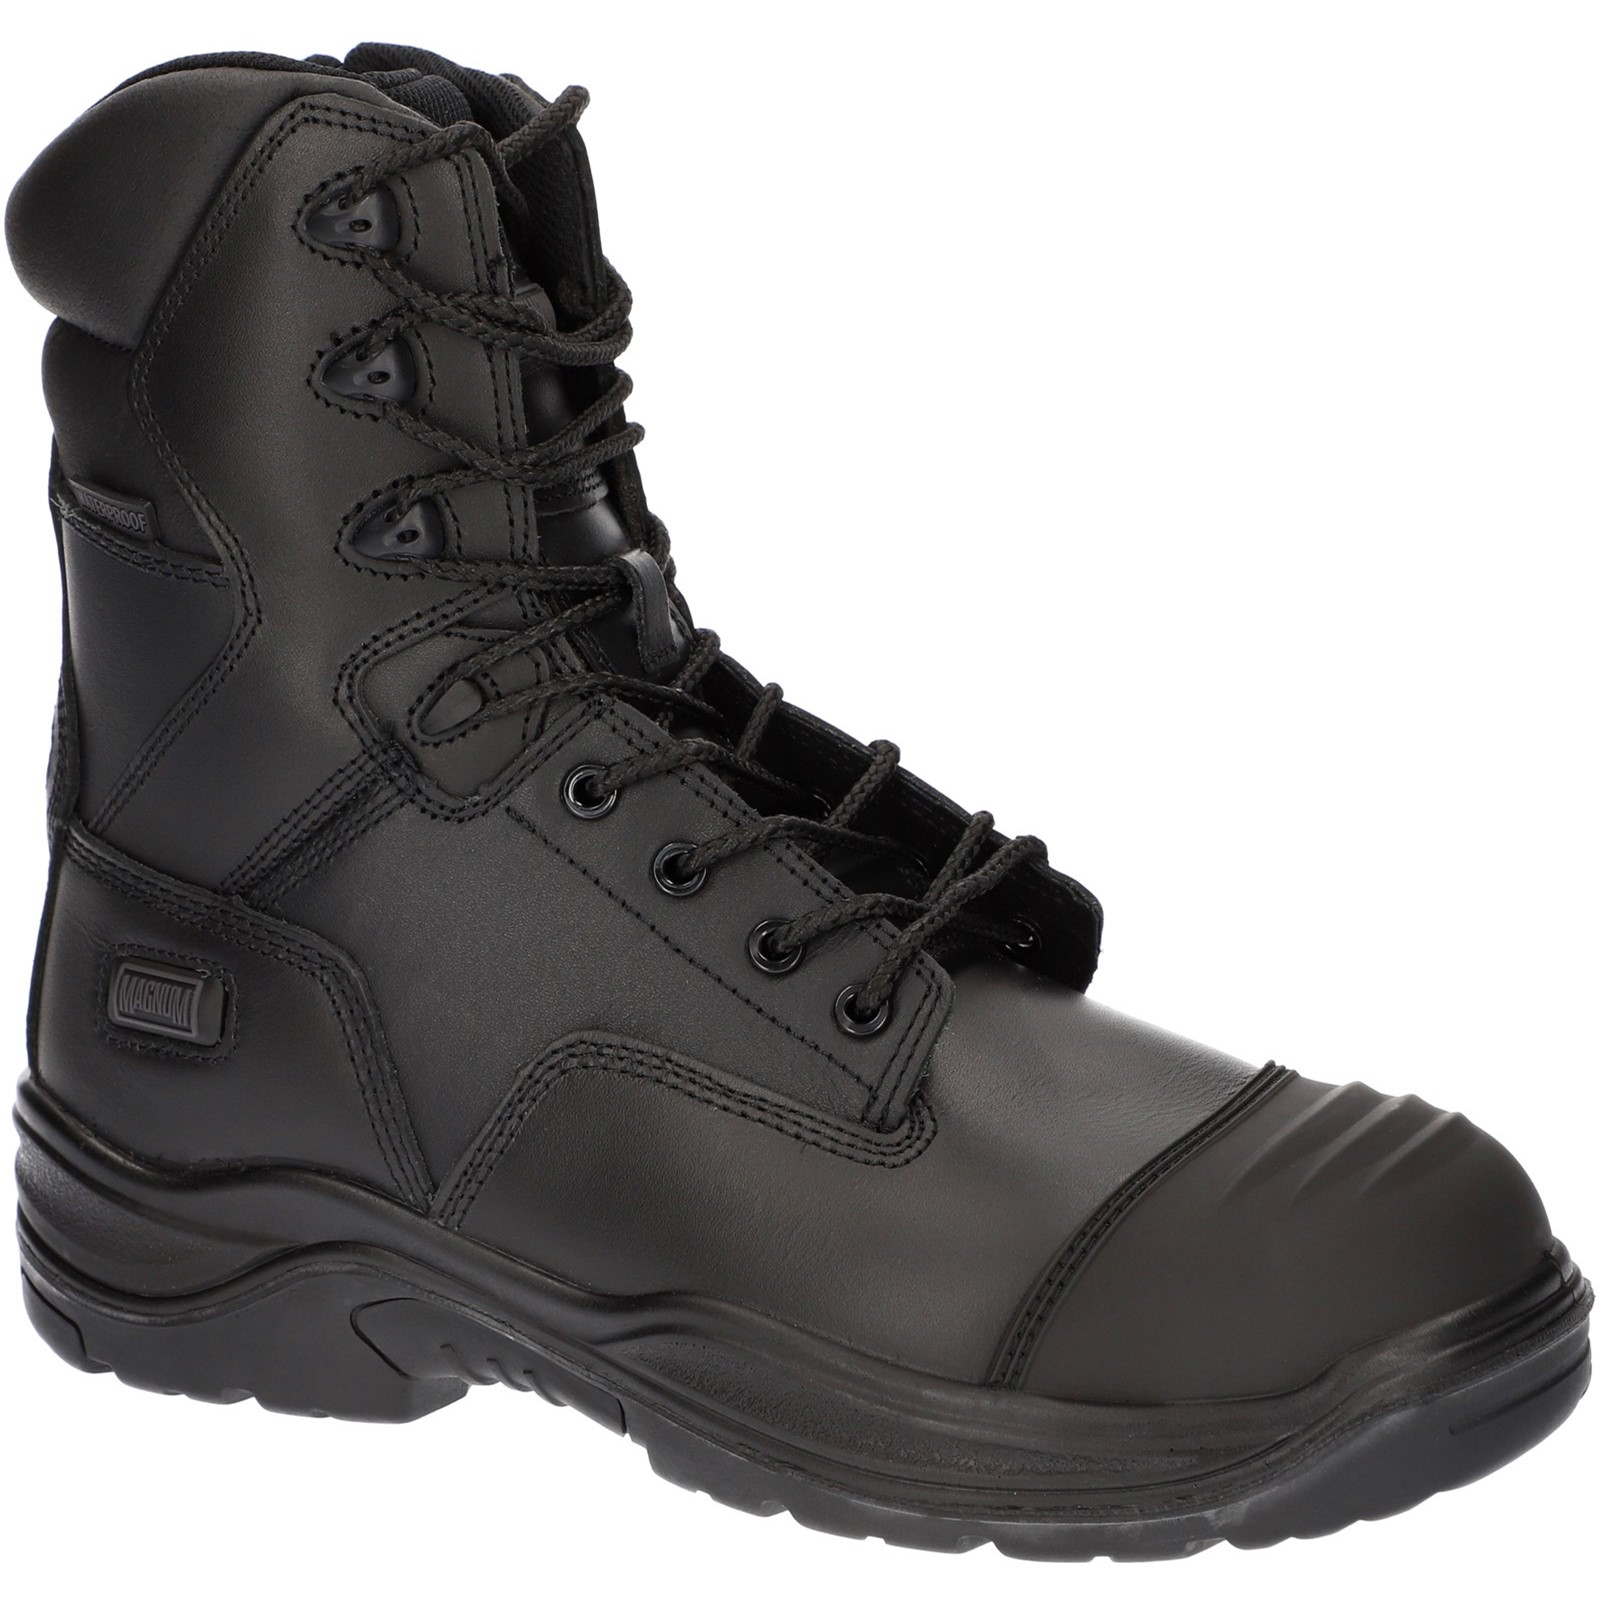 Rigmaster Side-Zip Uniform Safety Boot